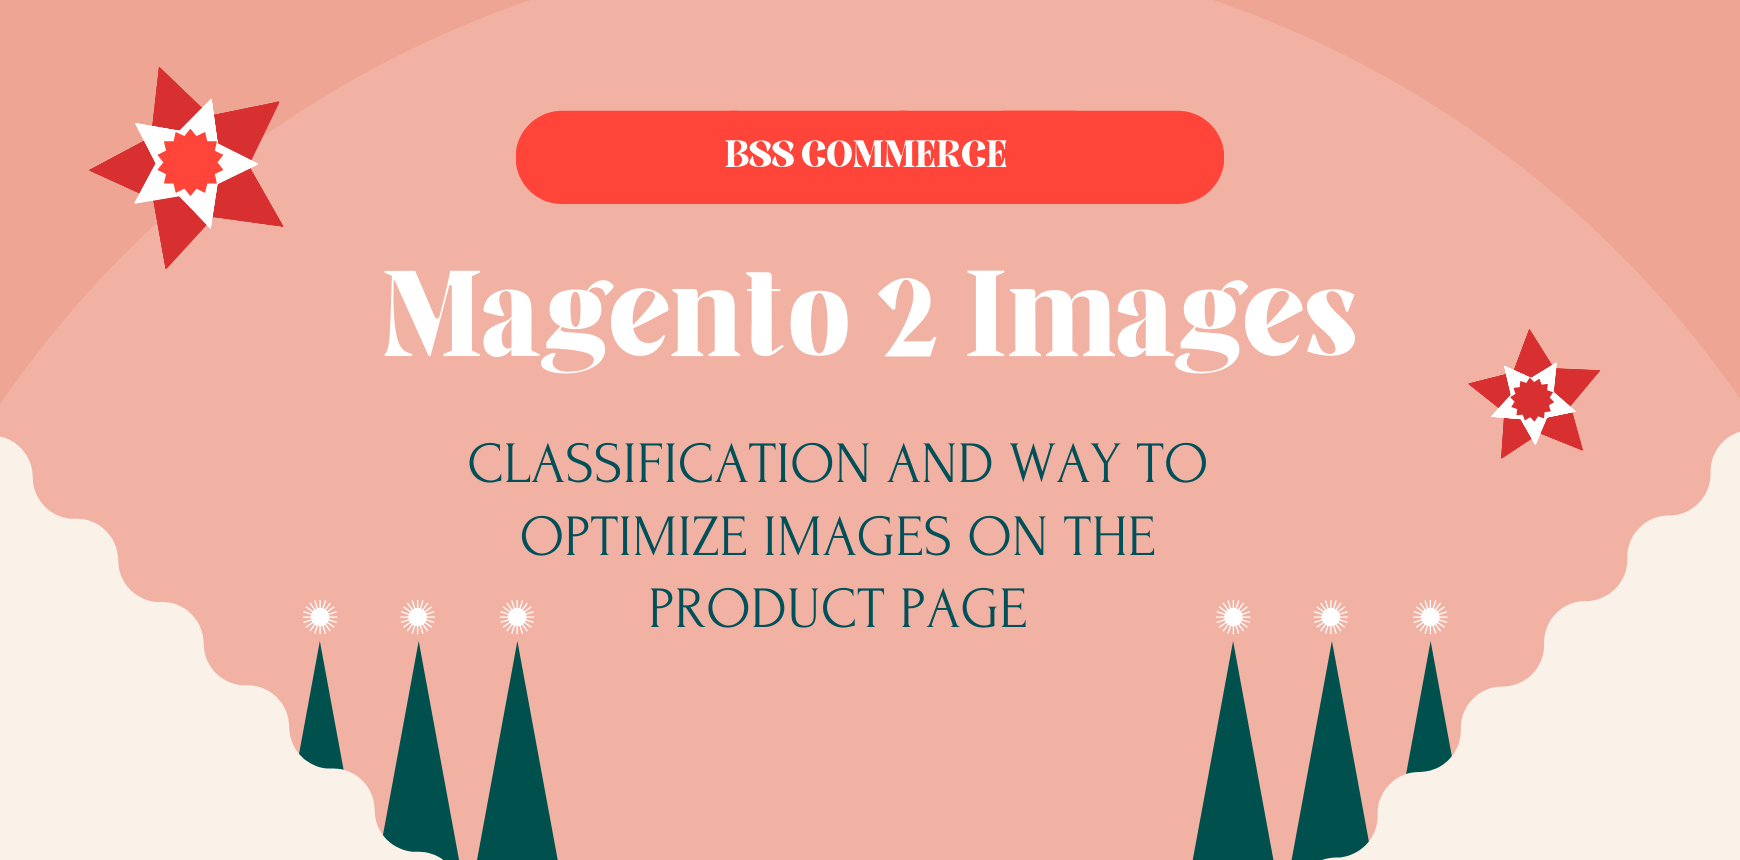 Classification and way to optimize images on the product page